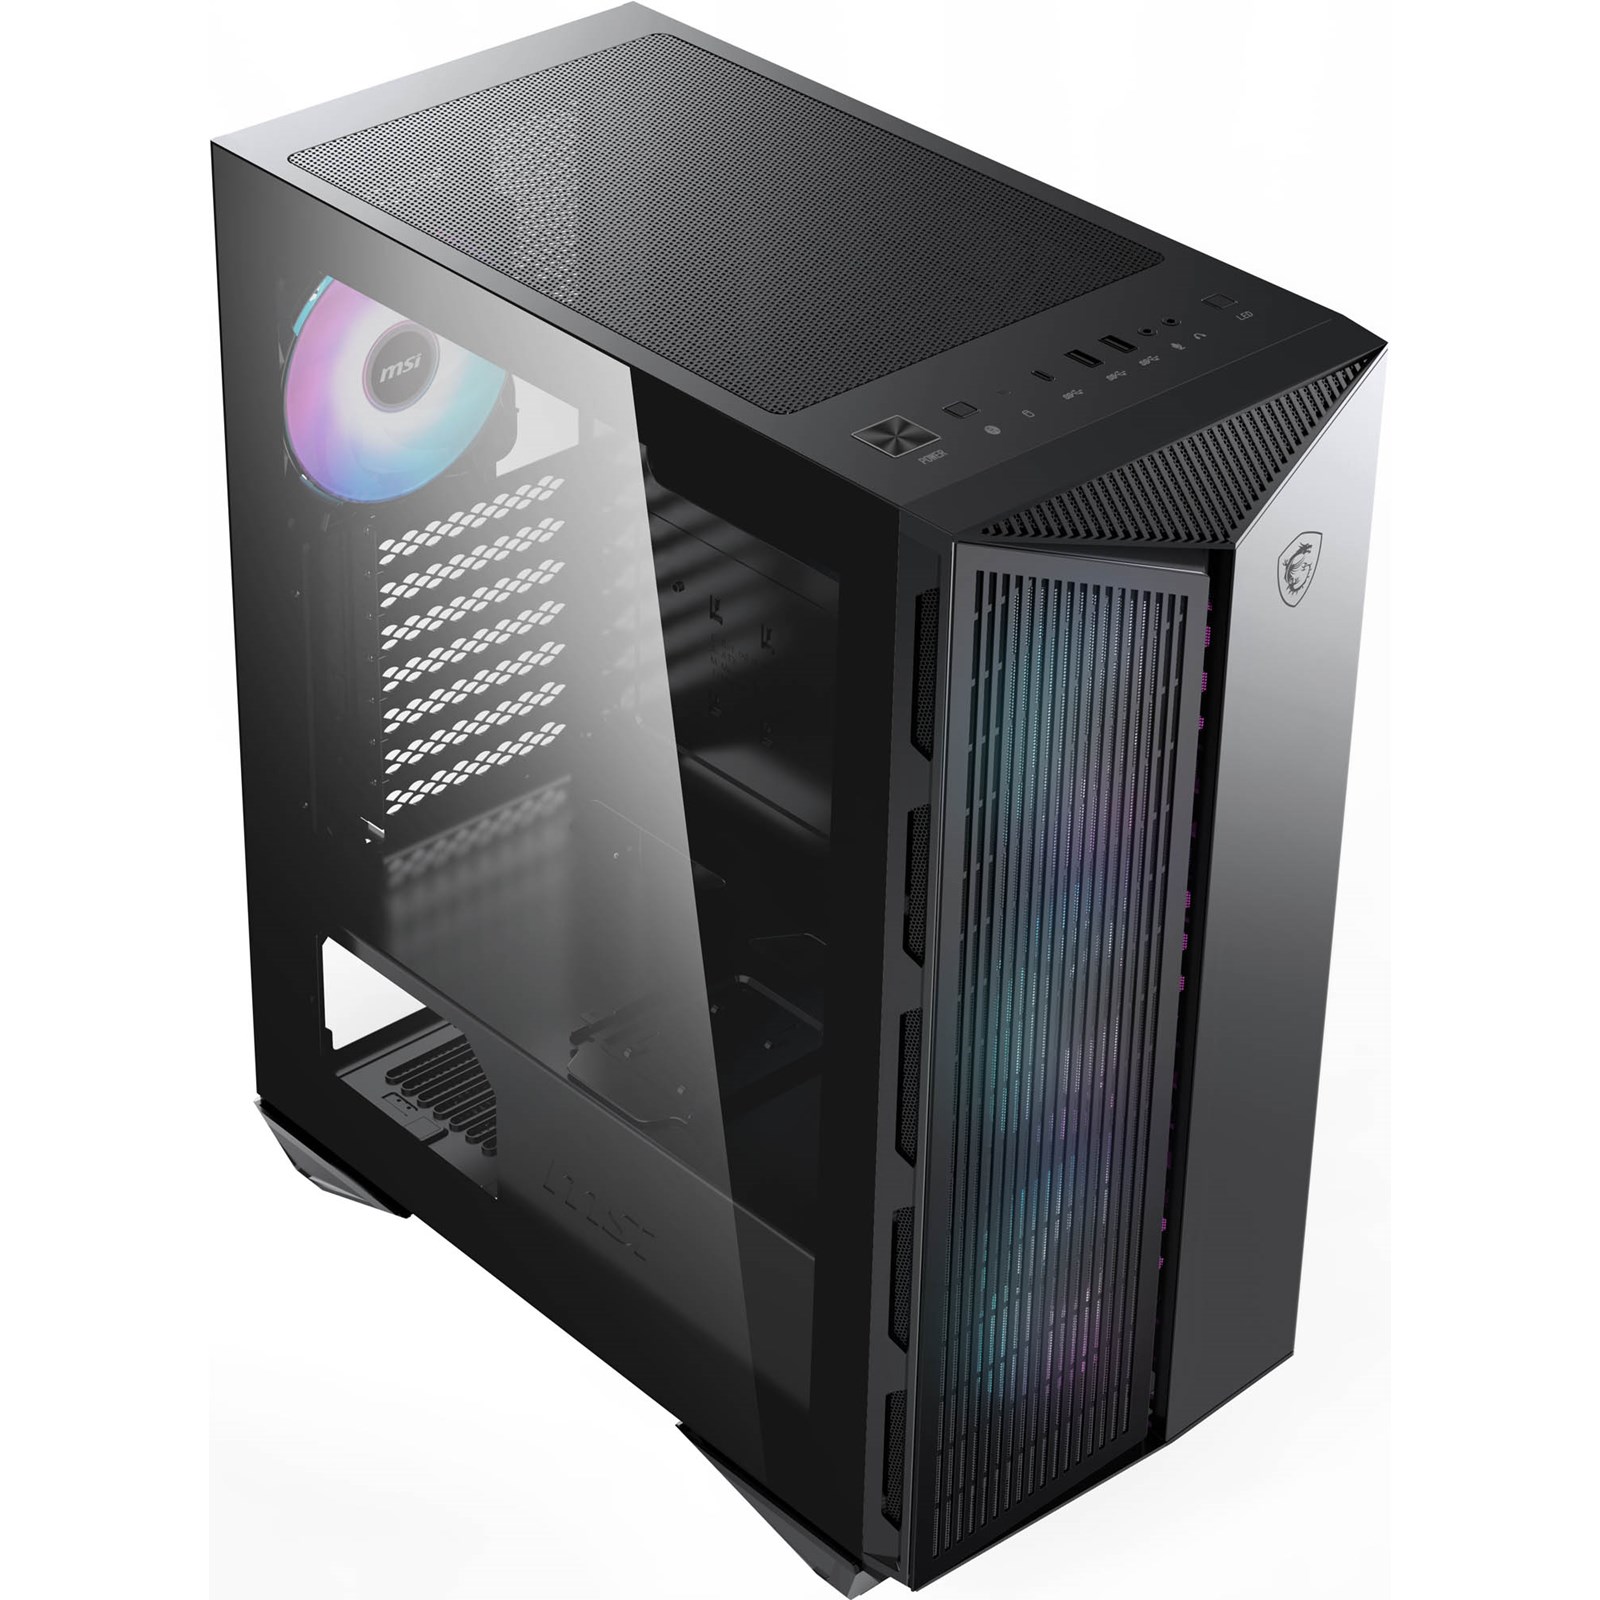  MSI MAG Forge 111R Mid Tower Gaming PC Case (Black,1 x 120mm  ARGB Fans, USB 3.2 Gen 1 Type-A, Tempered Glass Panel, Magnetic Dust  Filter, ATX, m-ATX, Mini-ITX) : Electronics